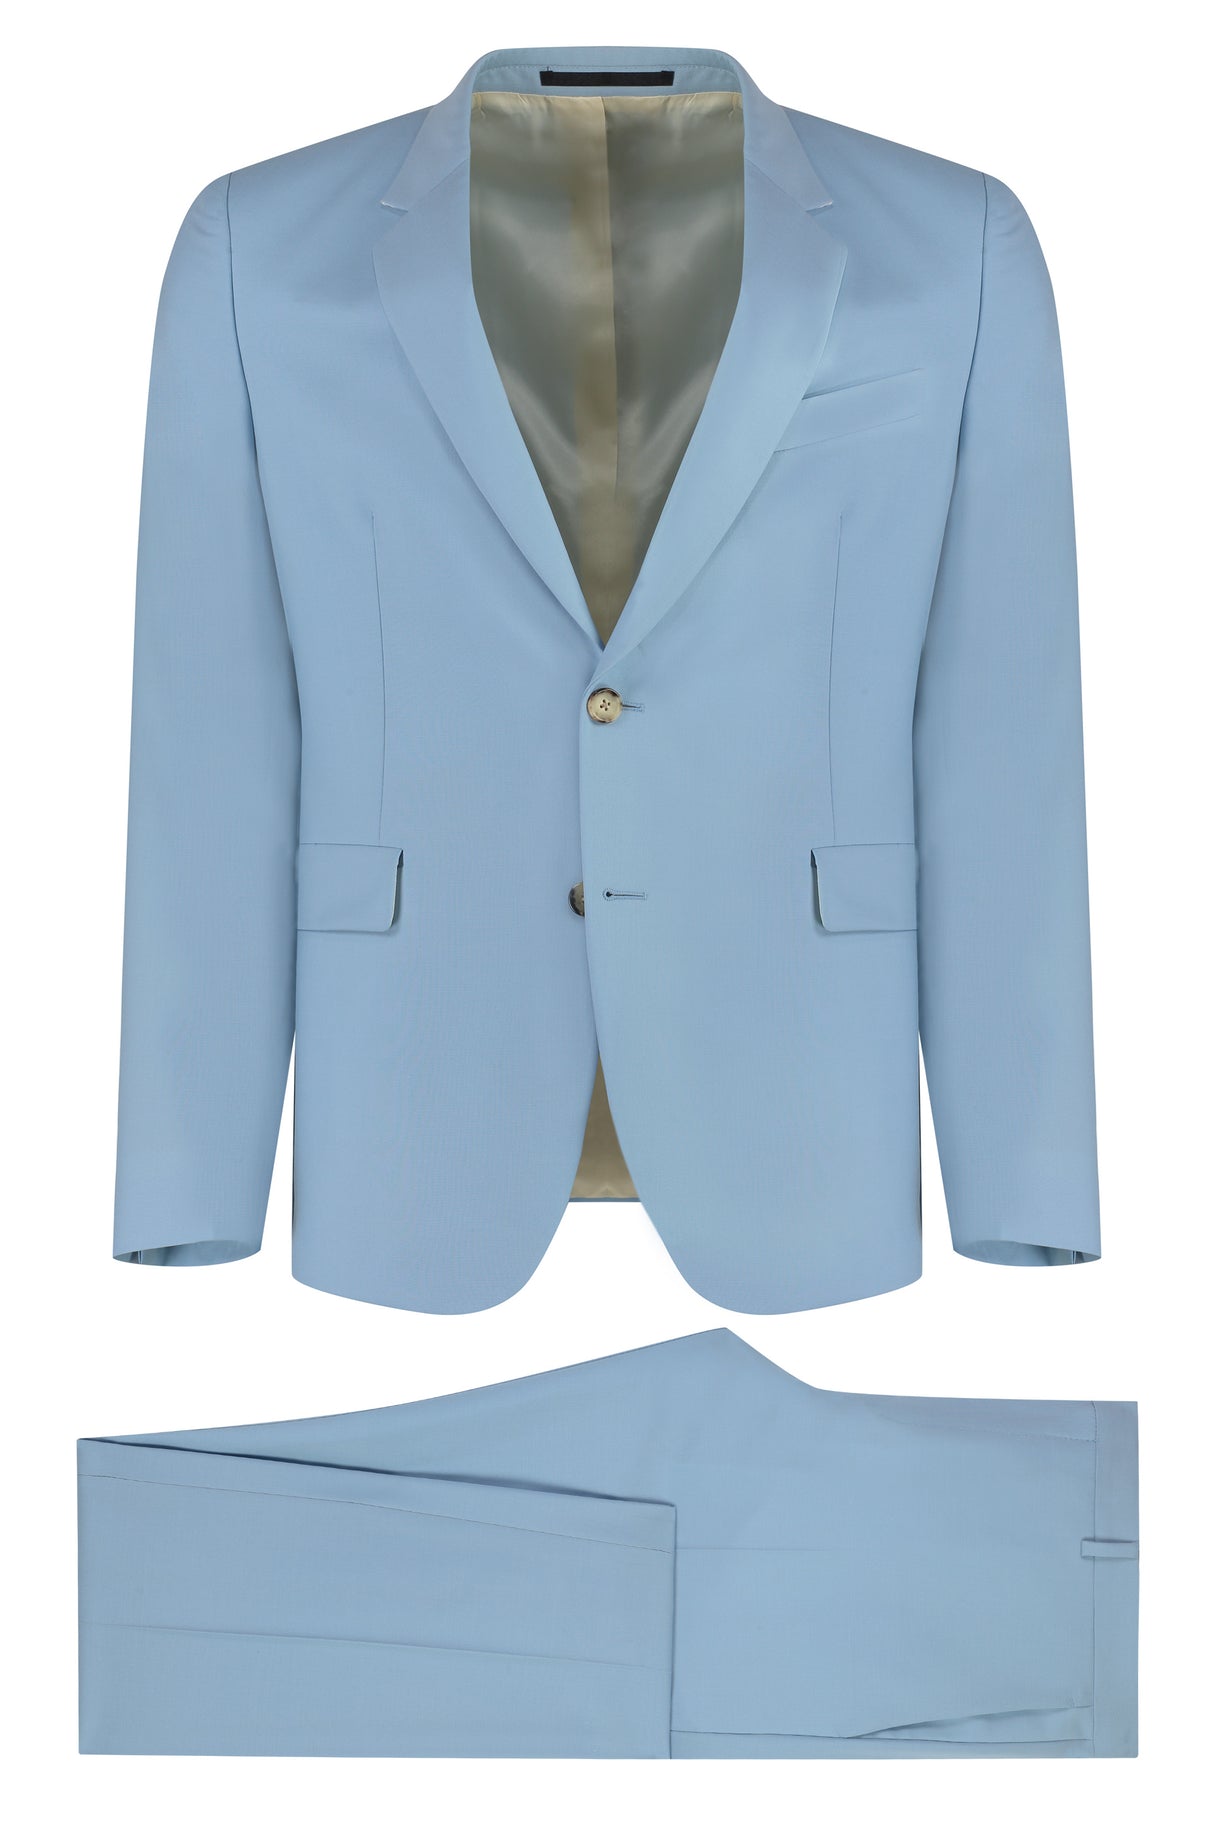 PAUL SMITH Men's Light Blue Wool and Mohair Suit for SS23